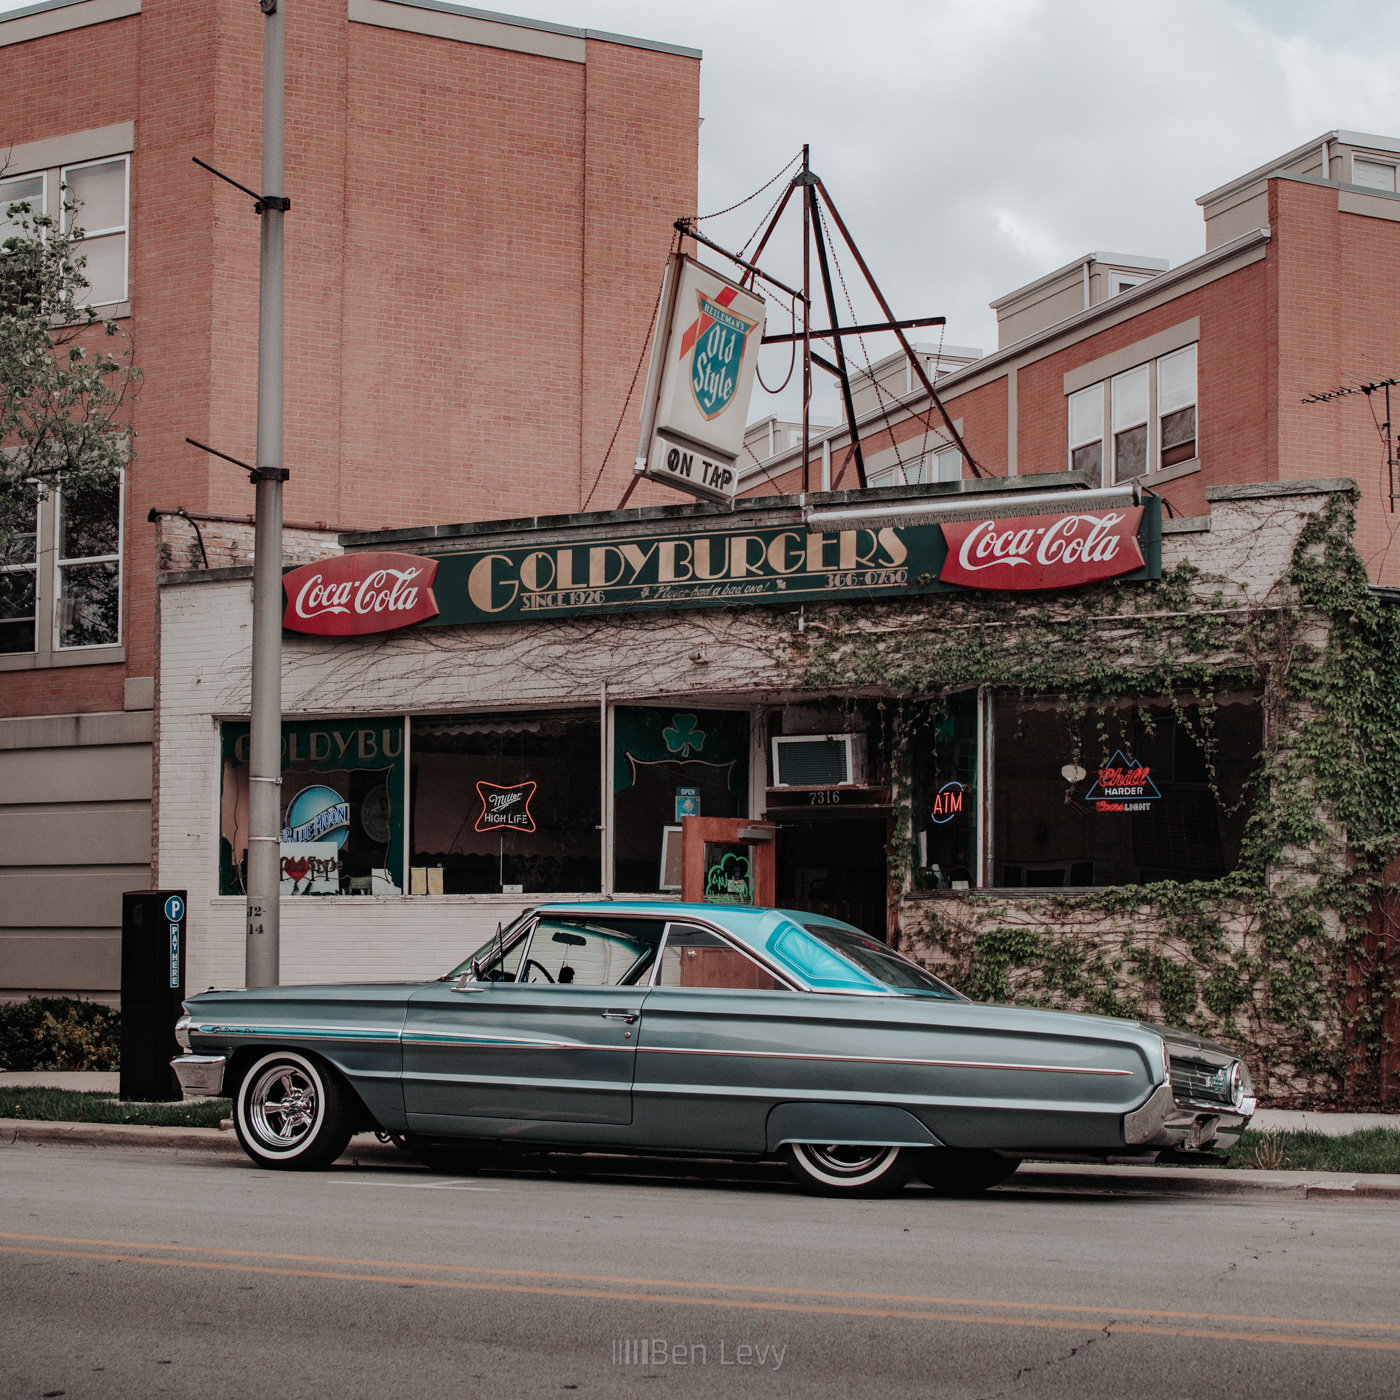 A Blue Ford Galaxie 500 outside of Goldyburgers in Forest Park